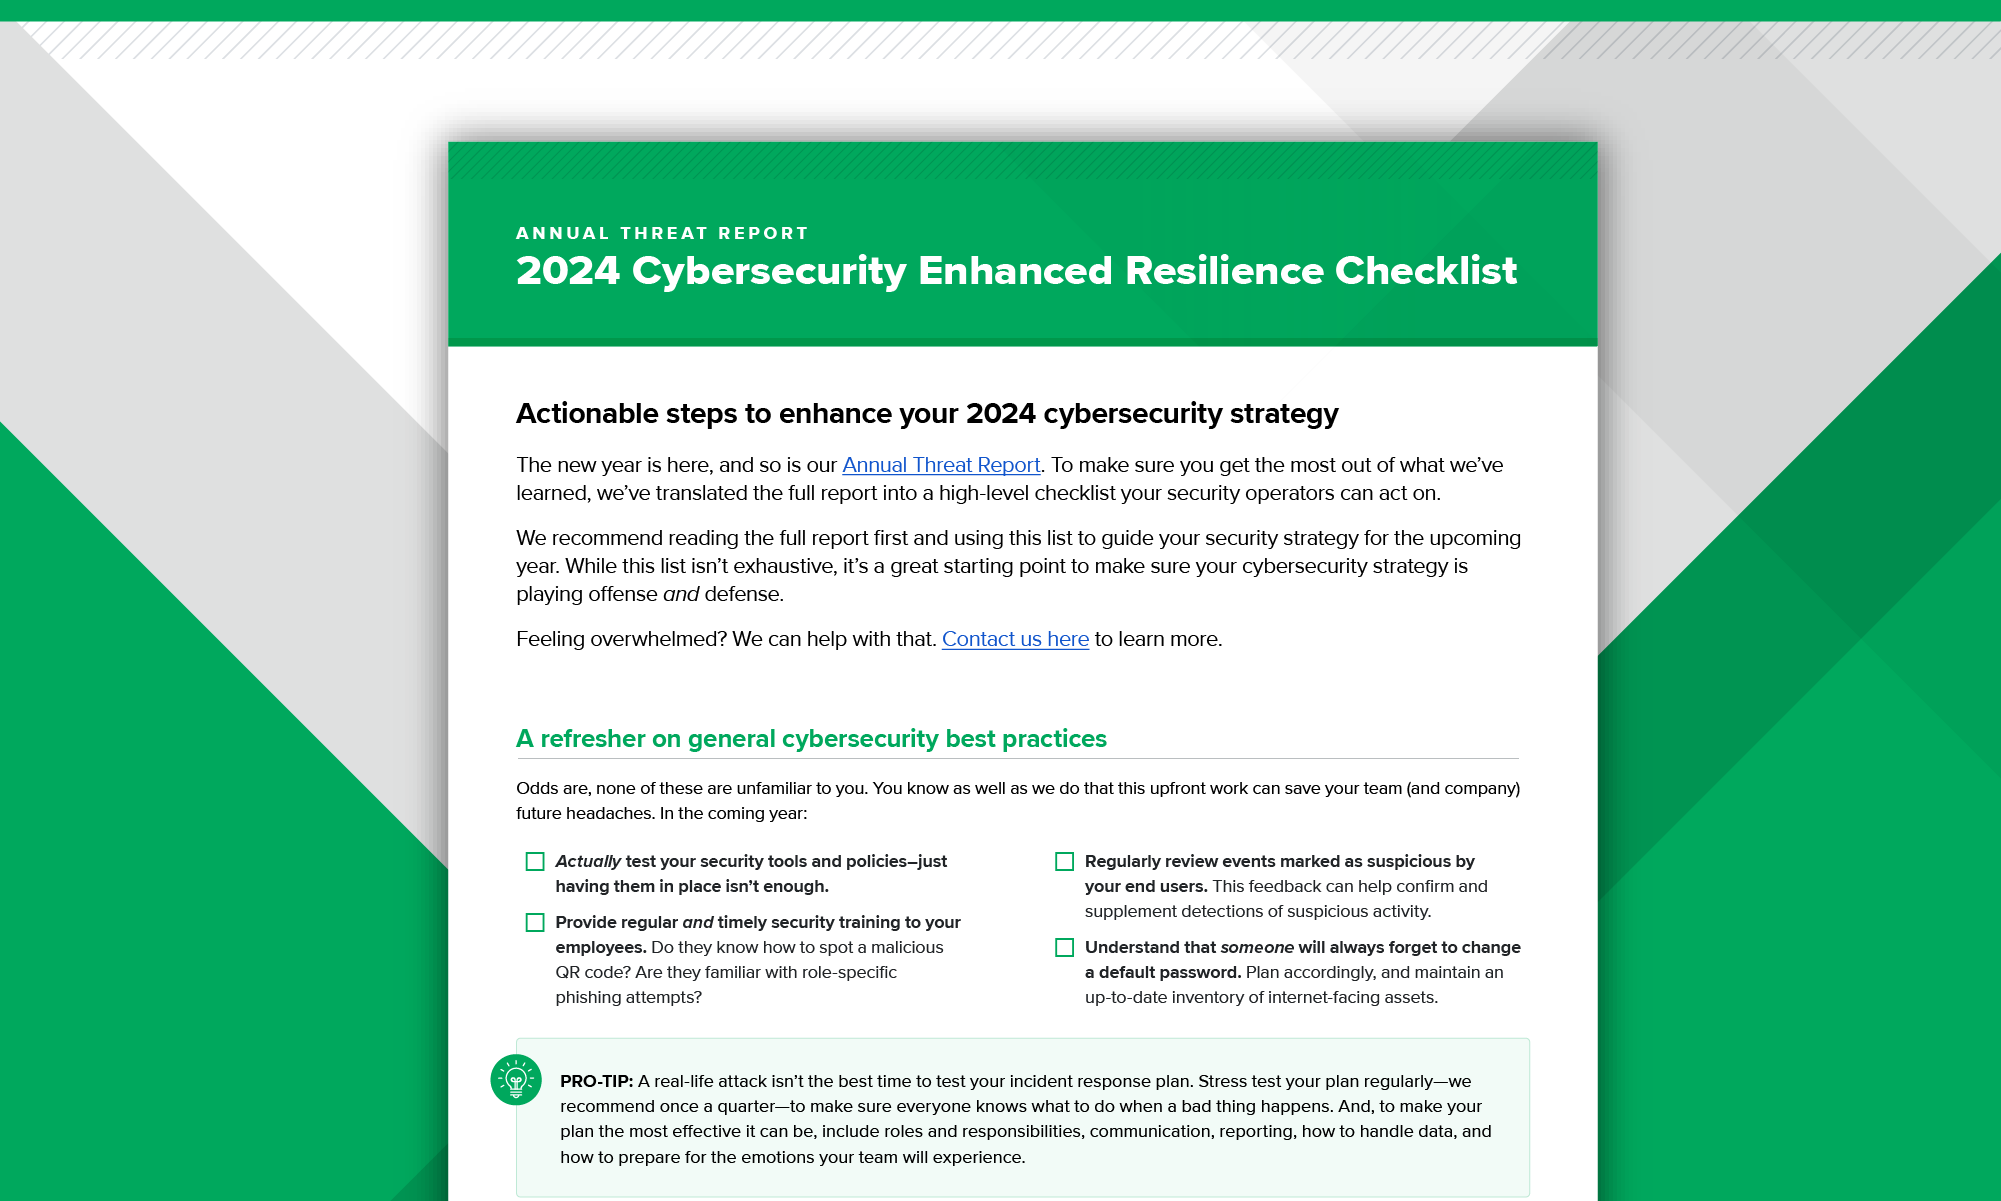 2024 Cybersecurity Enhanced Resilience Checklist